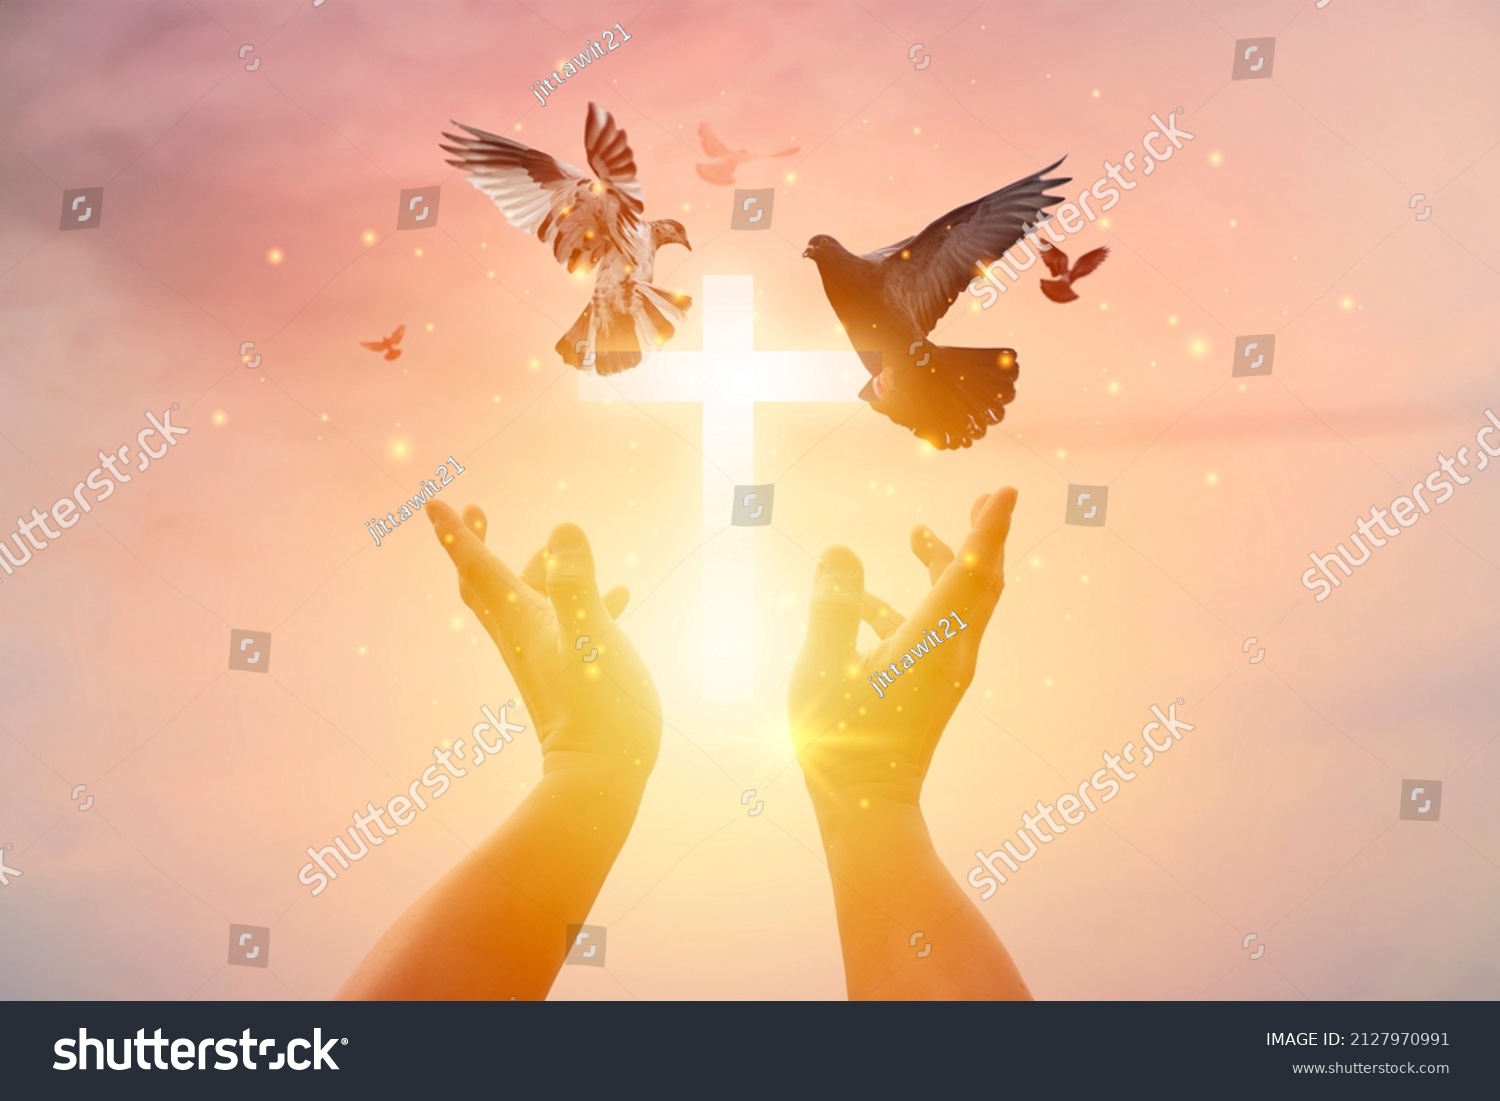 Woman praying with cross and flying bird in nature sunset background, hope concept #2127970991